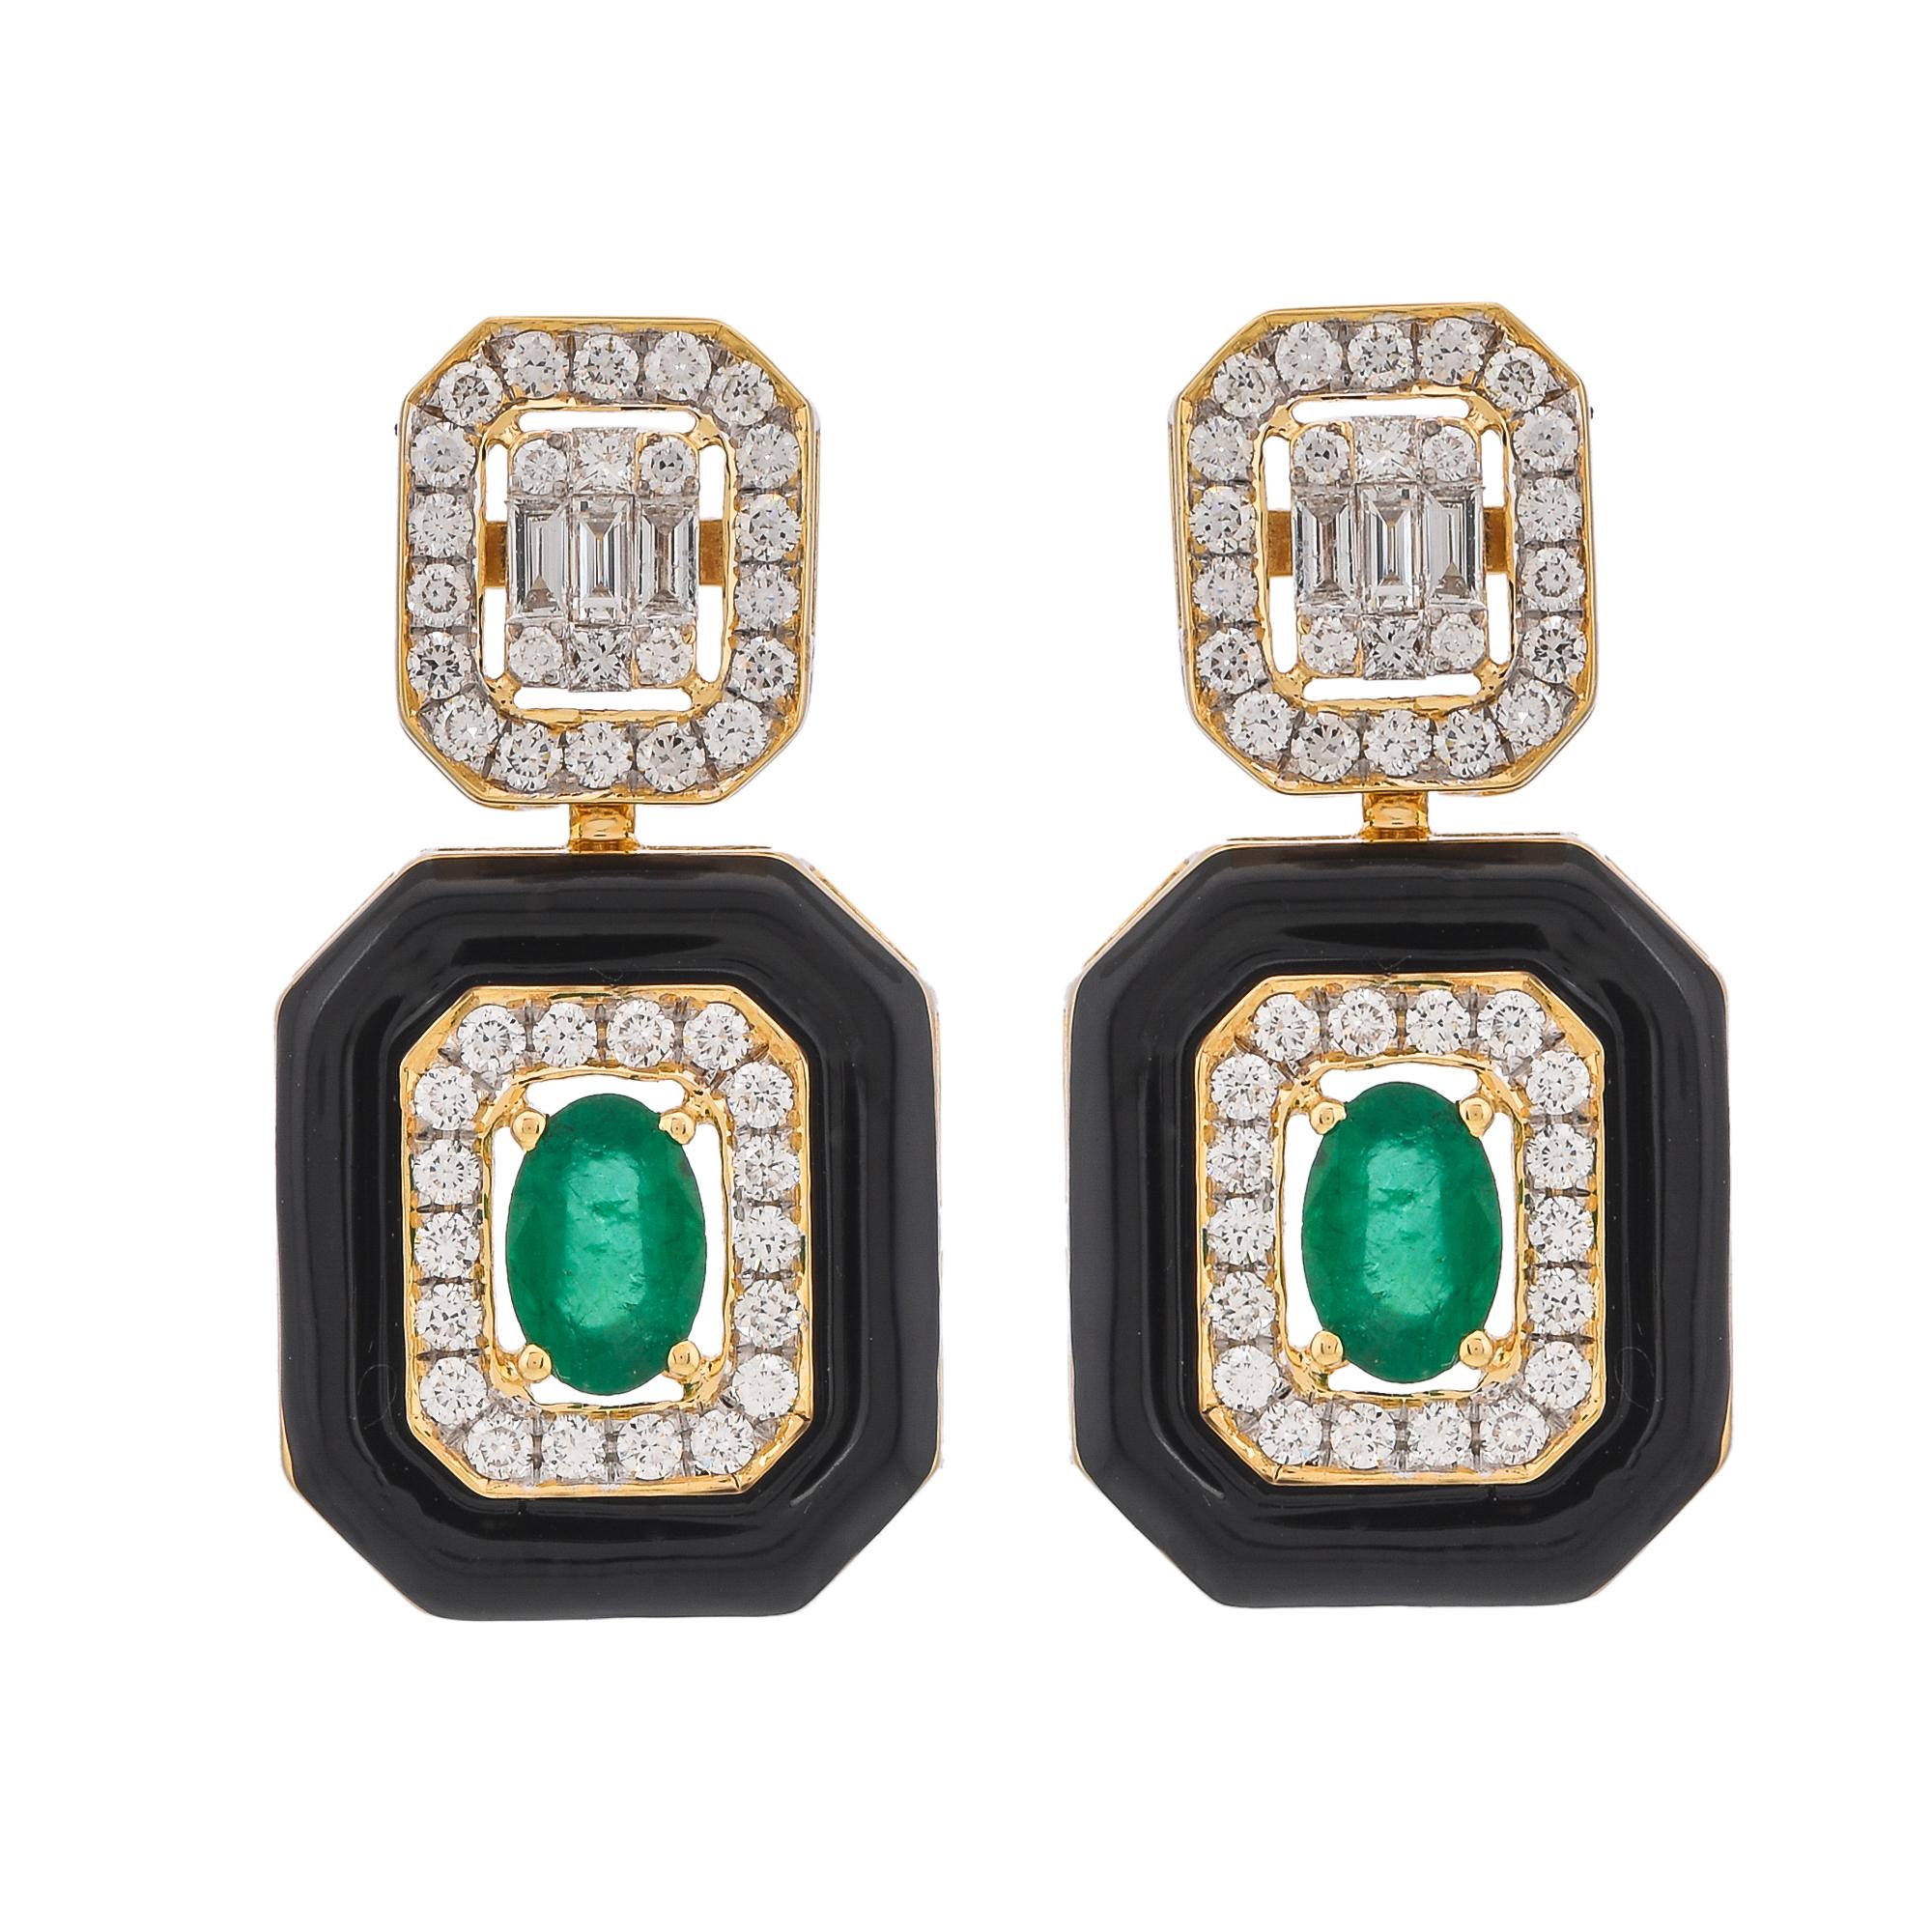 0.96 Carat Zambian Emerald Diamond and Black Enamel 18KT Yellow Gold Earrings In New Condition For Sale In Jaipur, Jaipur